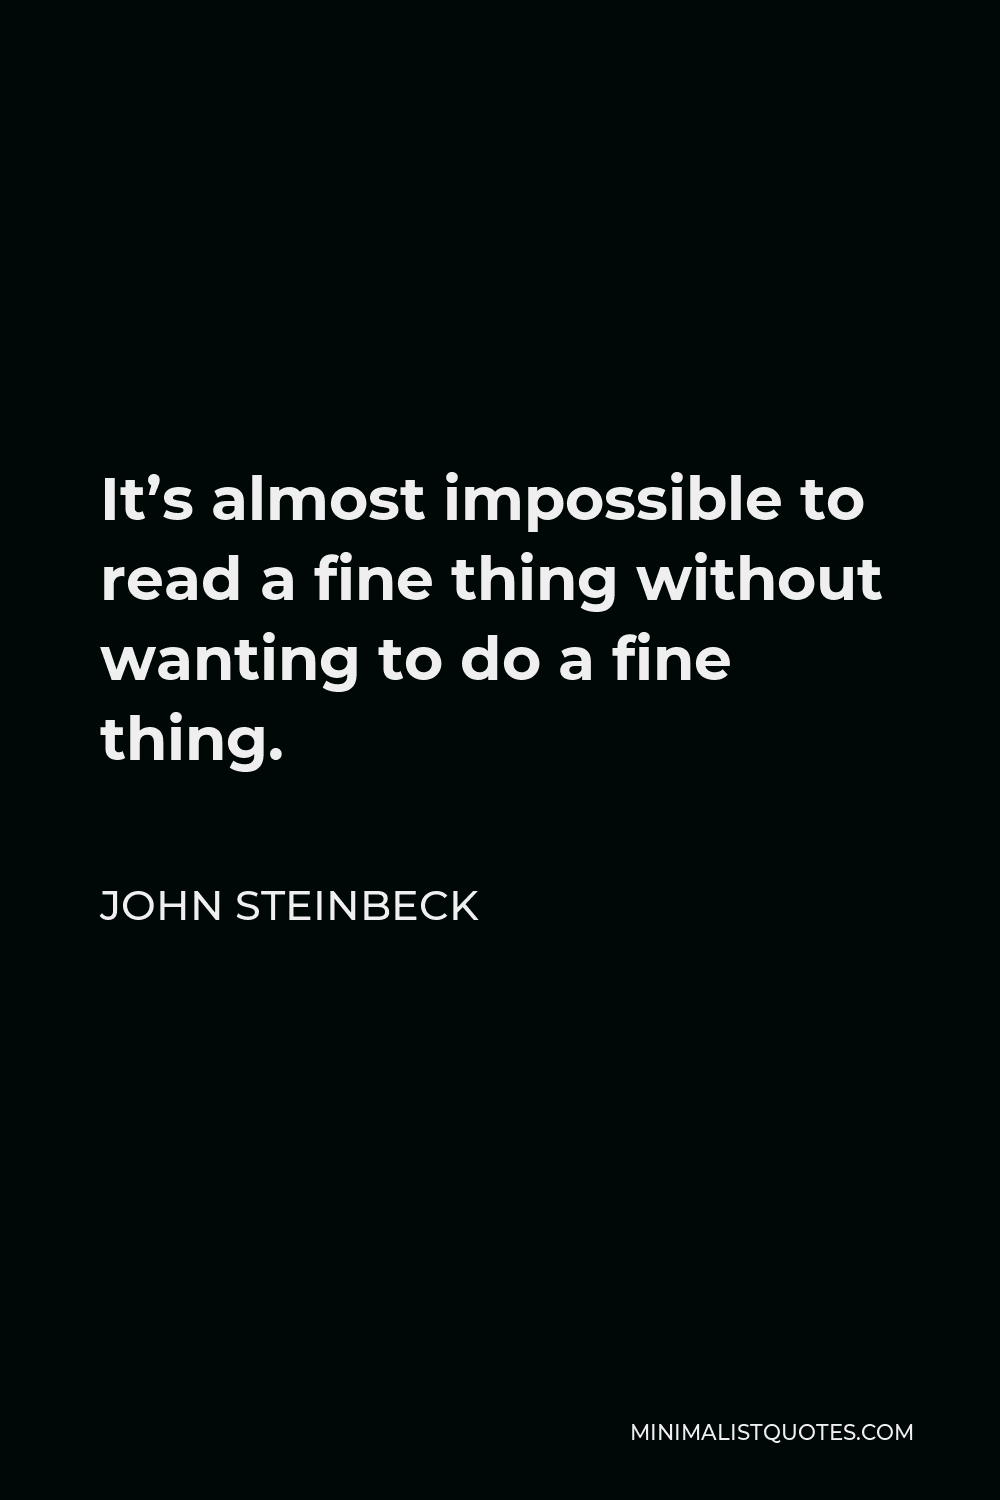 John Steinbeck Quote - It’s almost impossible to read a fine thing without wanting to do a fine thing.